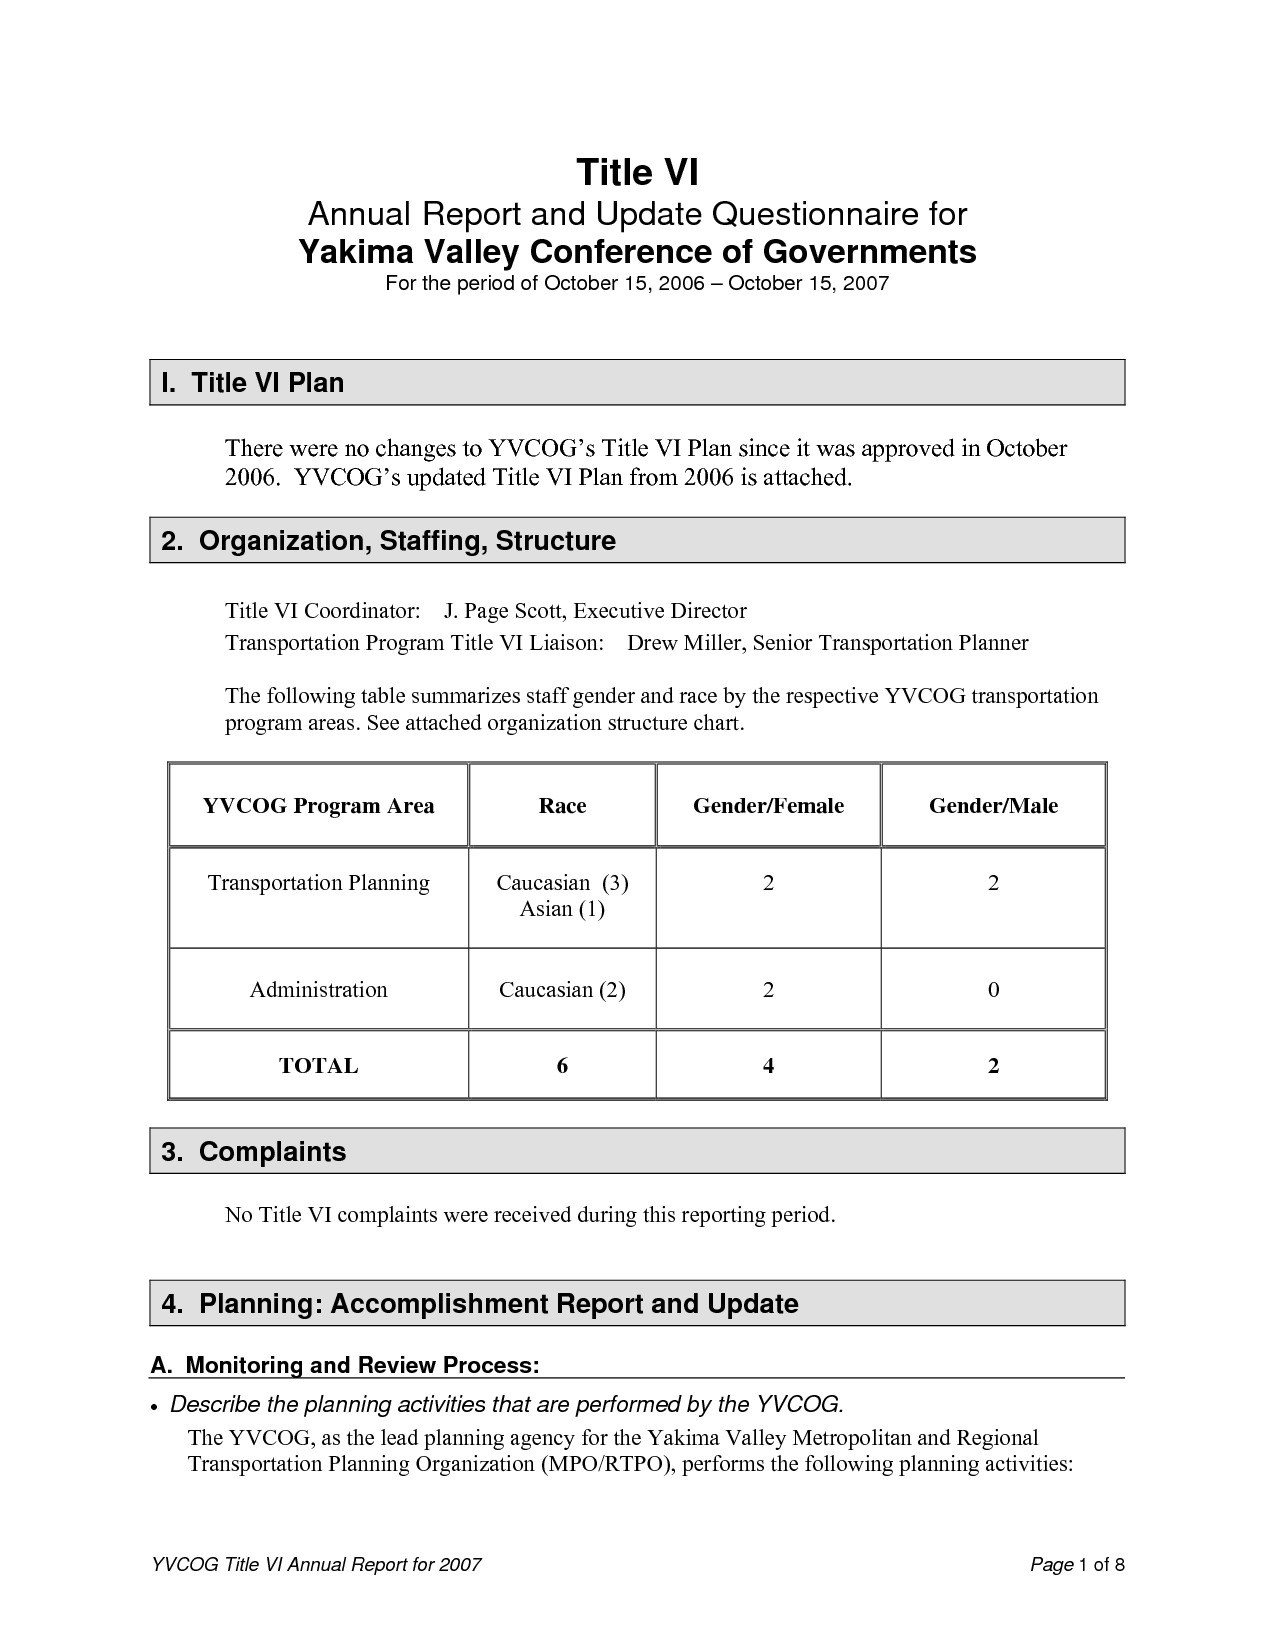 Accomplishment Report Format For Business Or Organizations Within Weekly Accomplishment Report Template